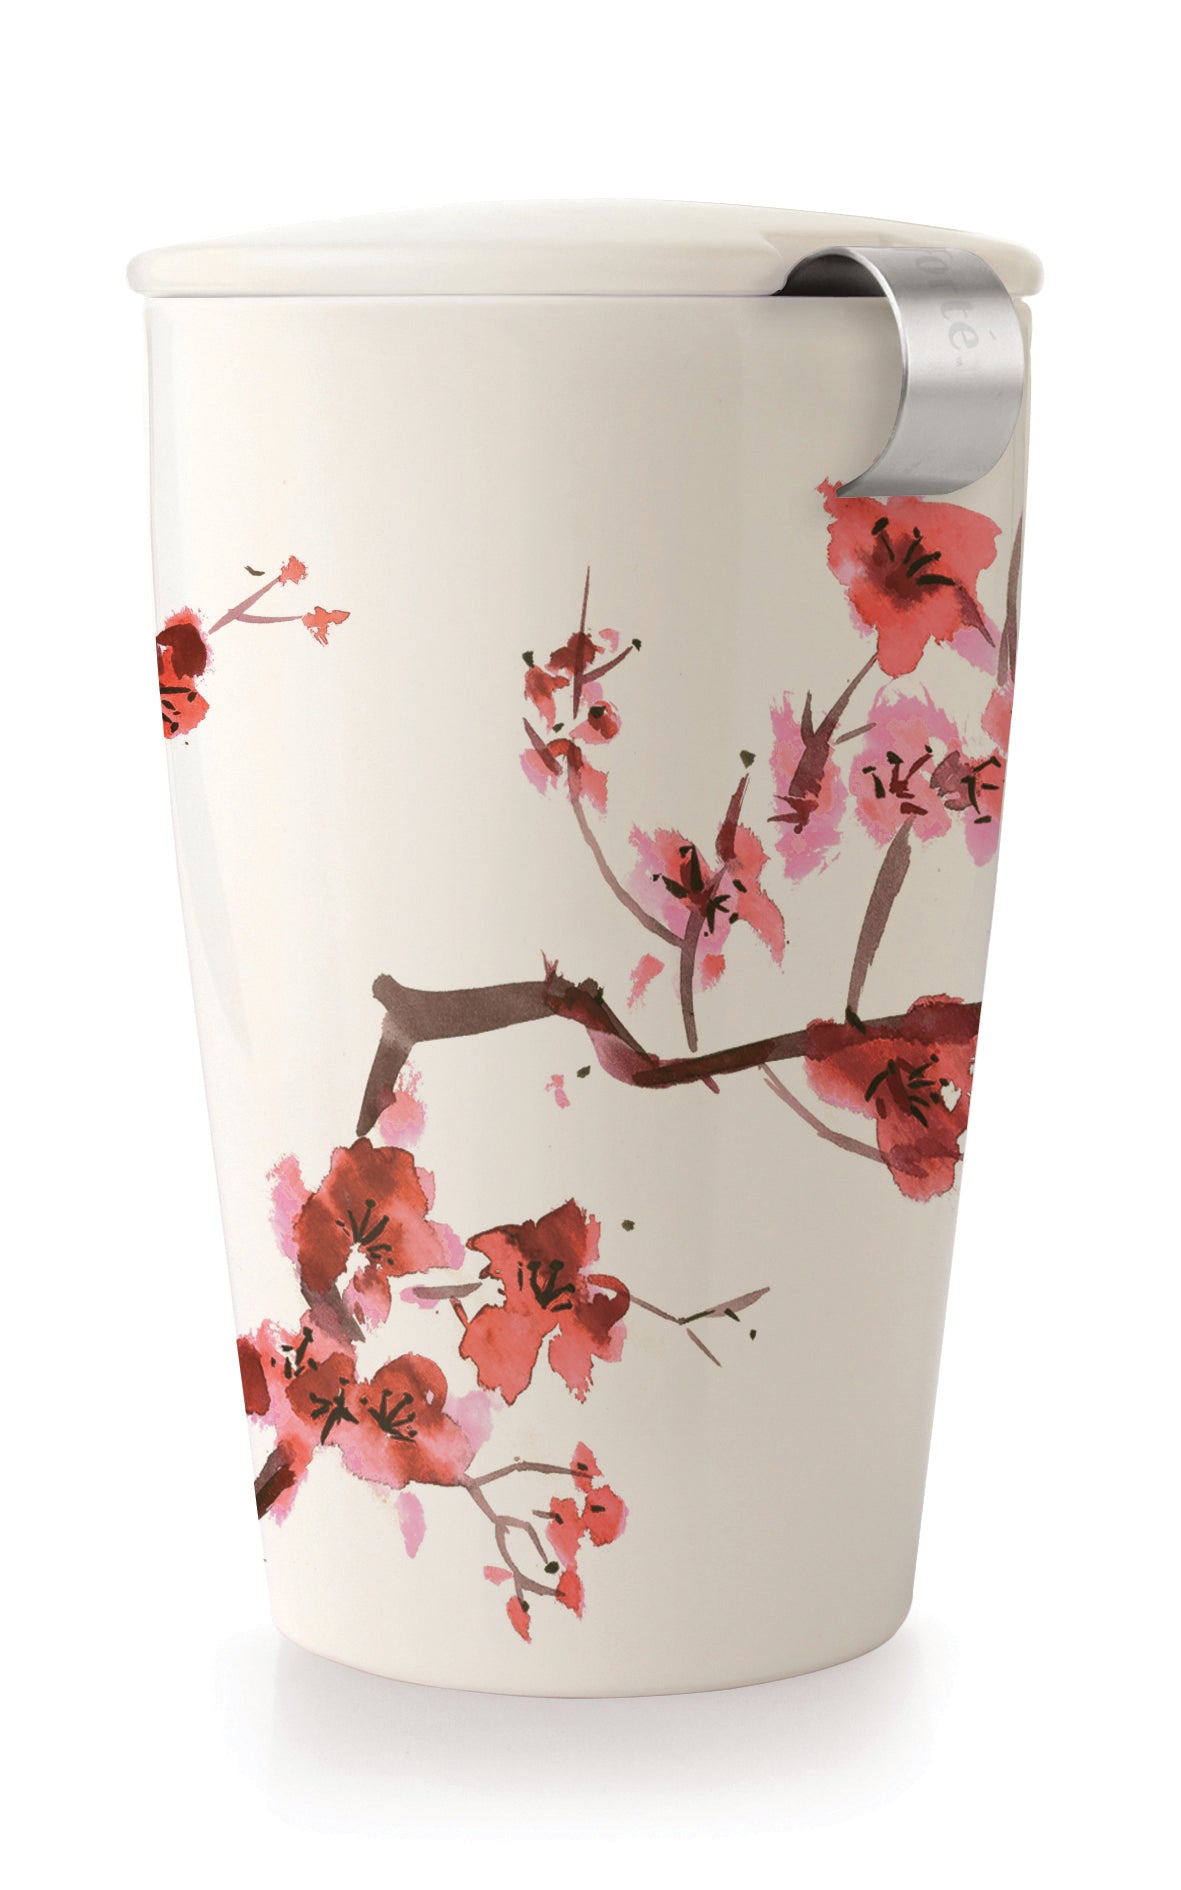 Steeping Cup- Cherry Blossom